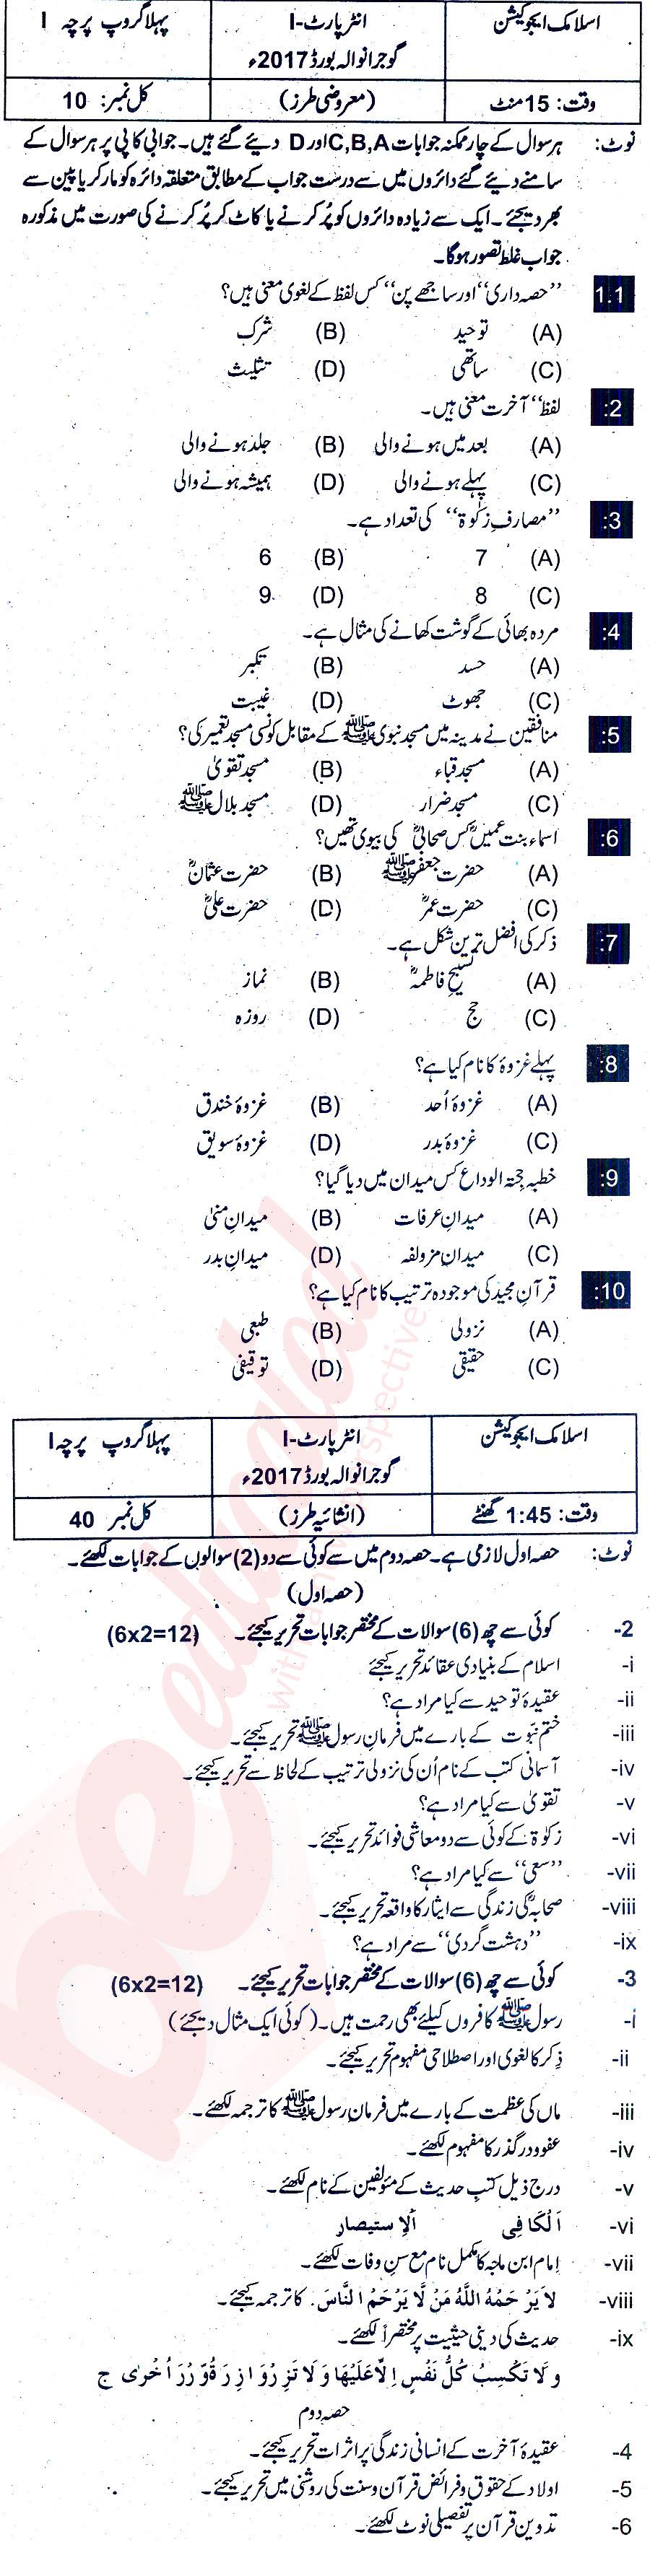 Islamic Studies 11th class Past Paper Group 1 BISE Gujranwala 2017